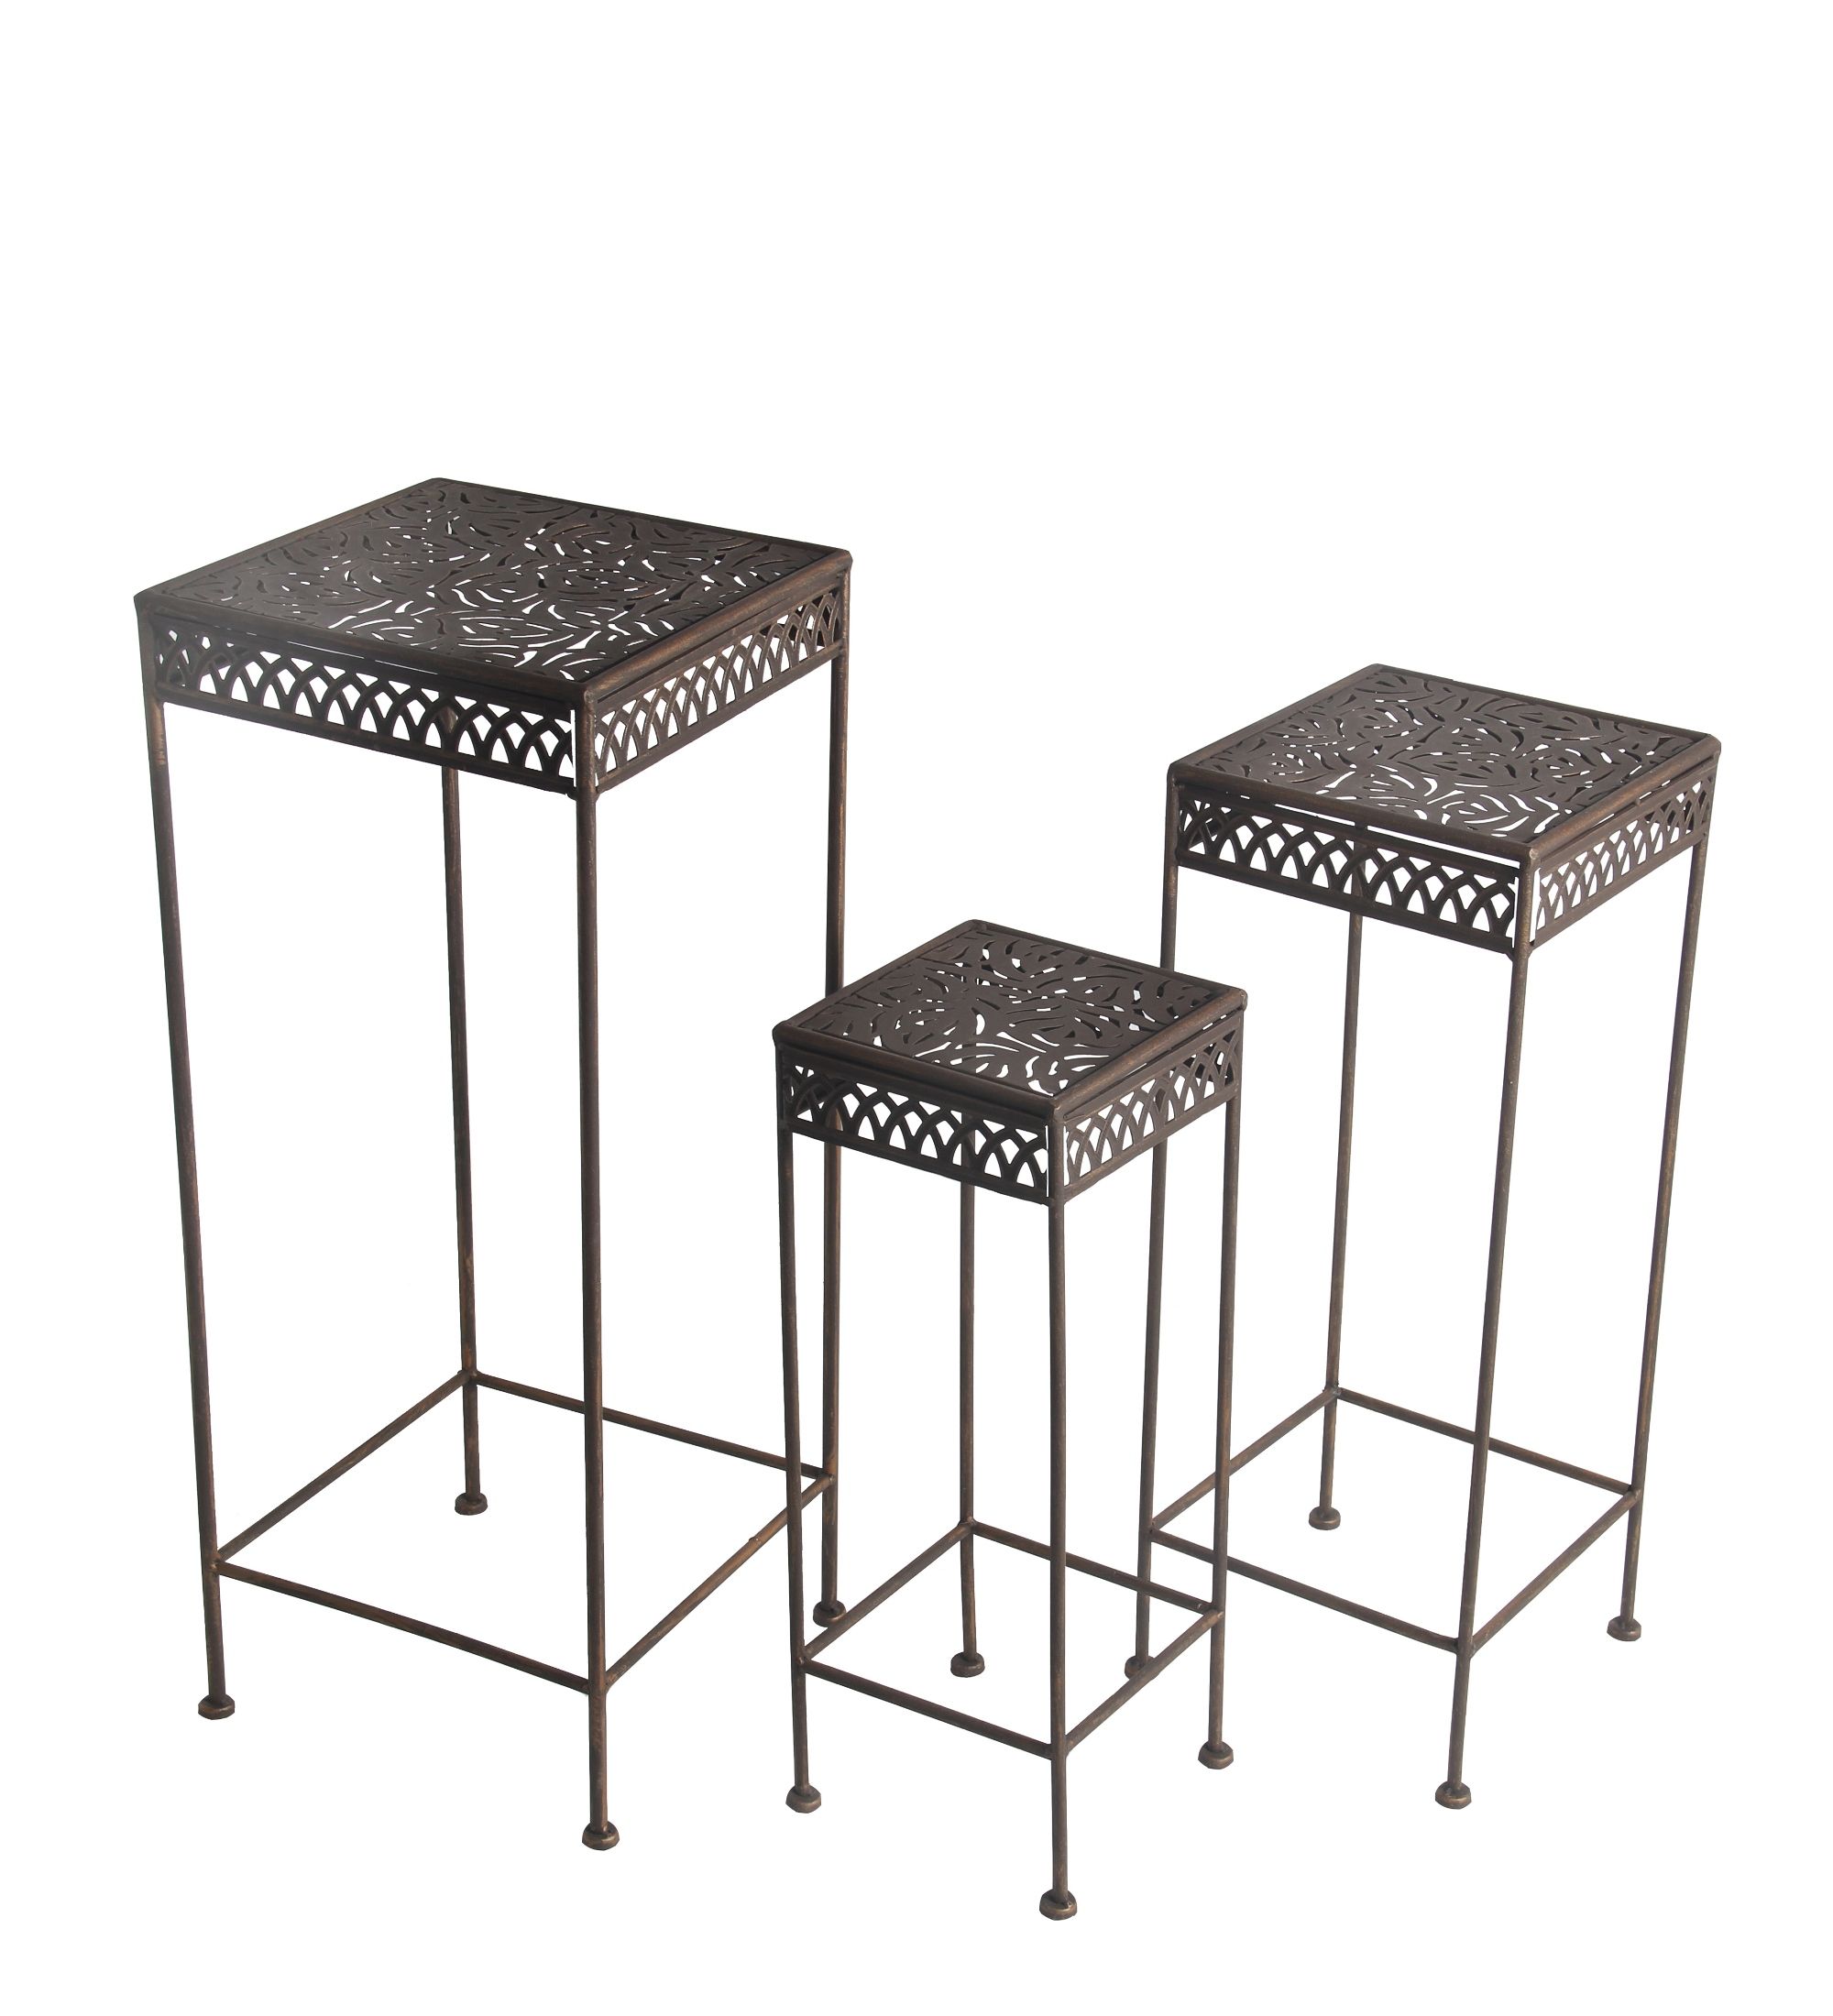 Privilege International Square Dark Bronze Finished Iron Plant Stand With  Square Brace Base – Set Of 3 – Walmart In Iron Square Plant Stands (View 10 of 15)